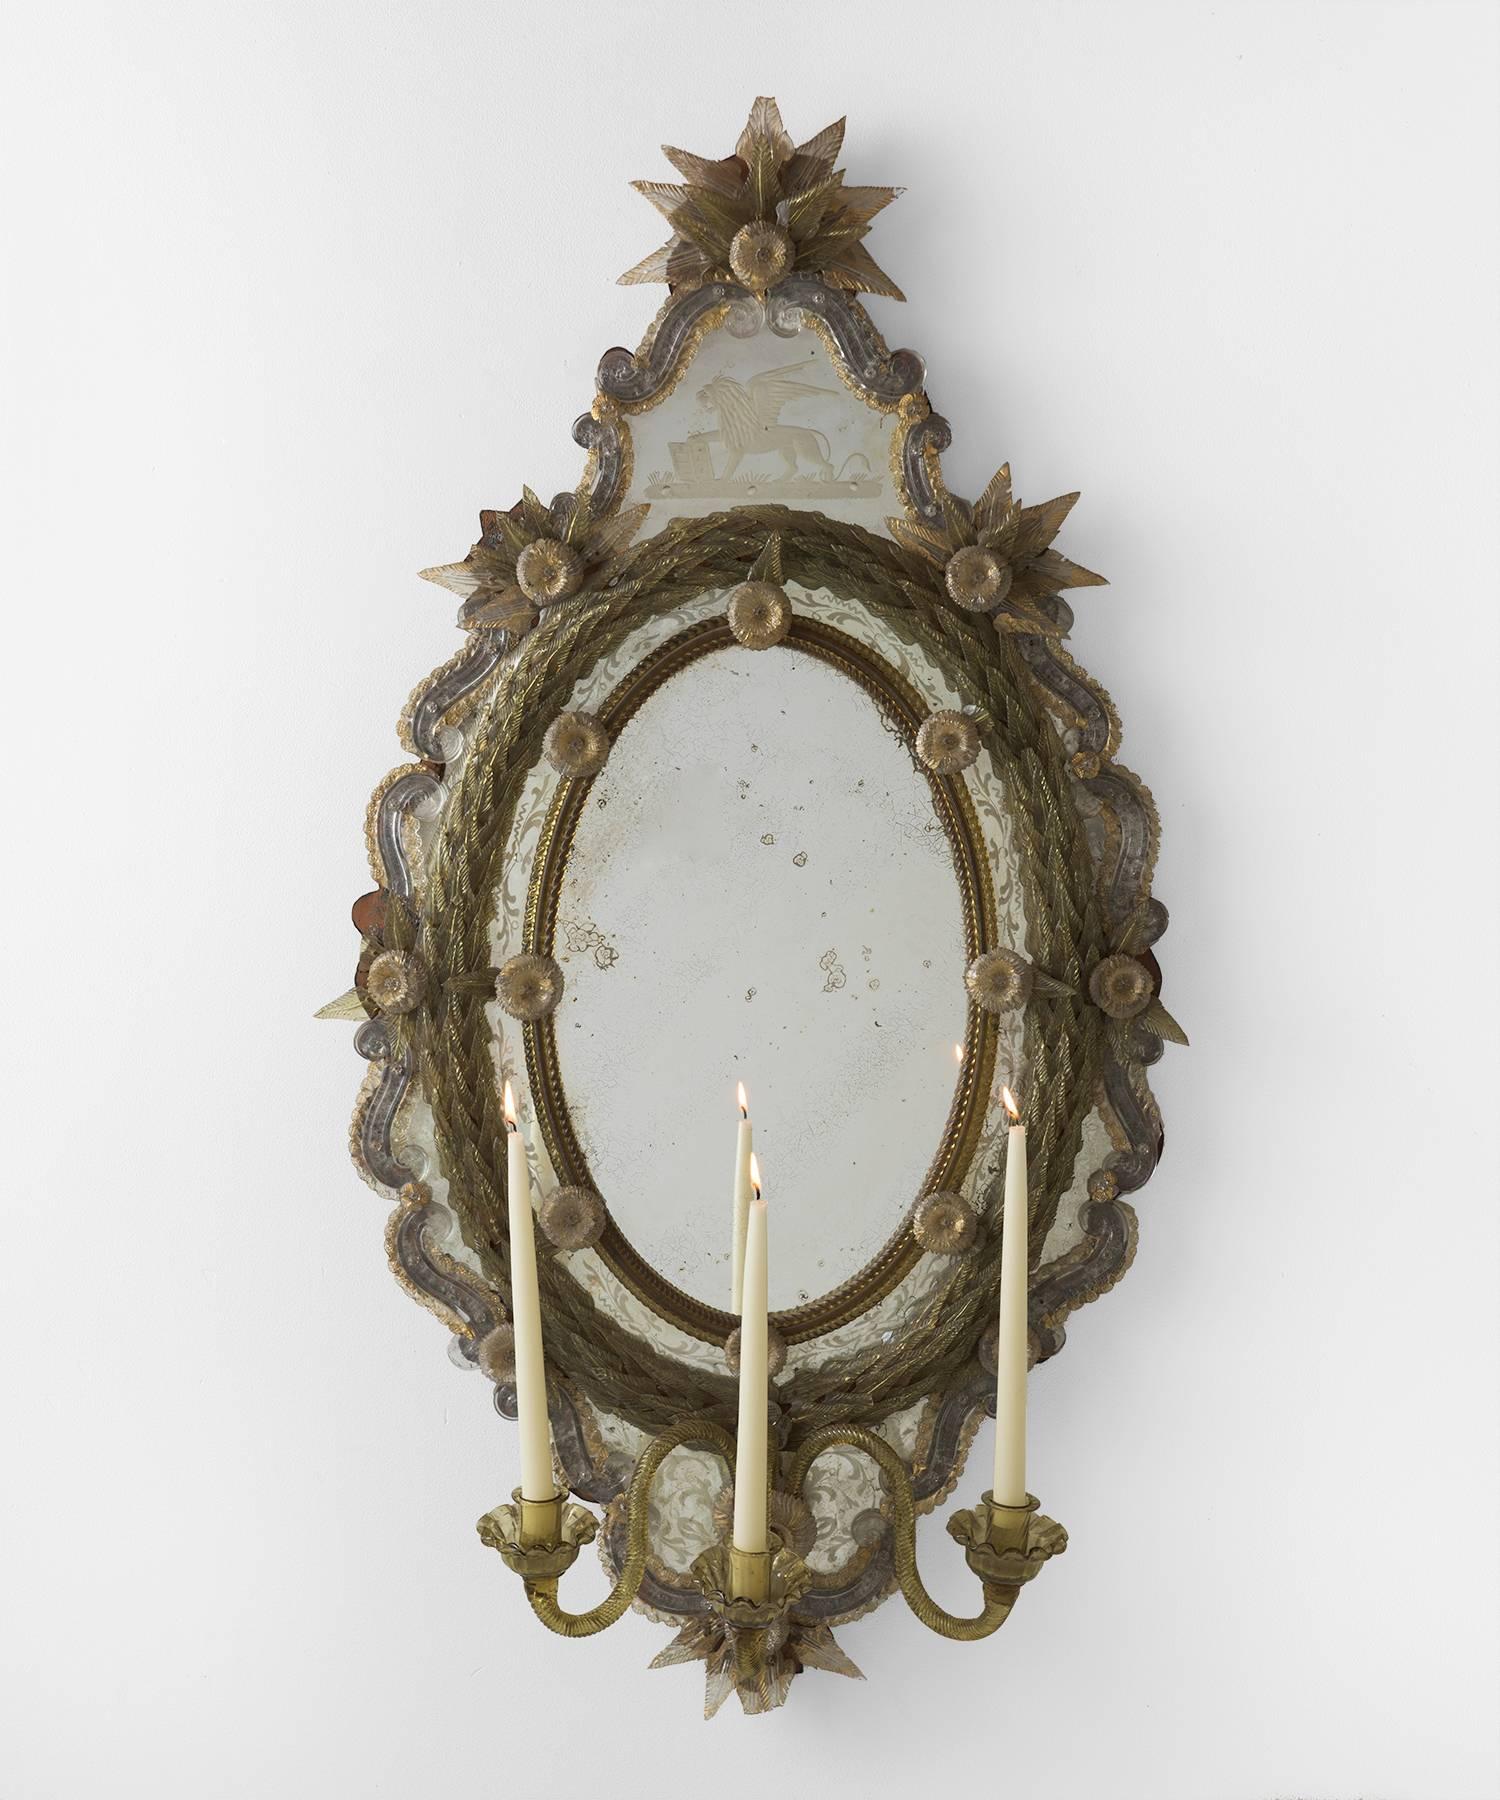 Ornate Venetian Murano glass mirror, circa 1810.

Incredibly ornate mirror of Murano glass with intricate details, amazing patina, and a trio of candleholders.
 